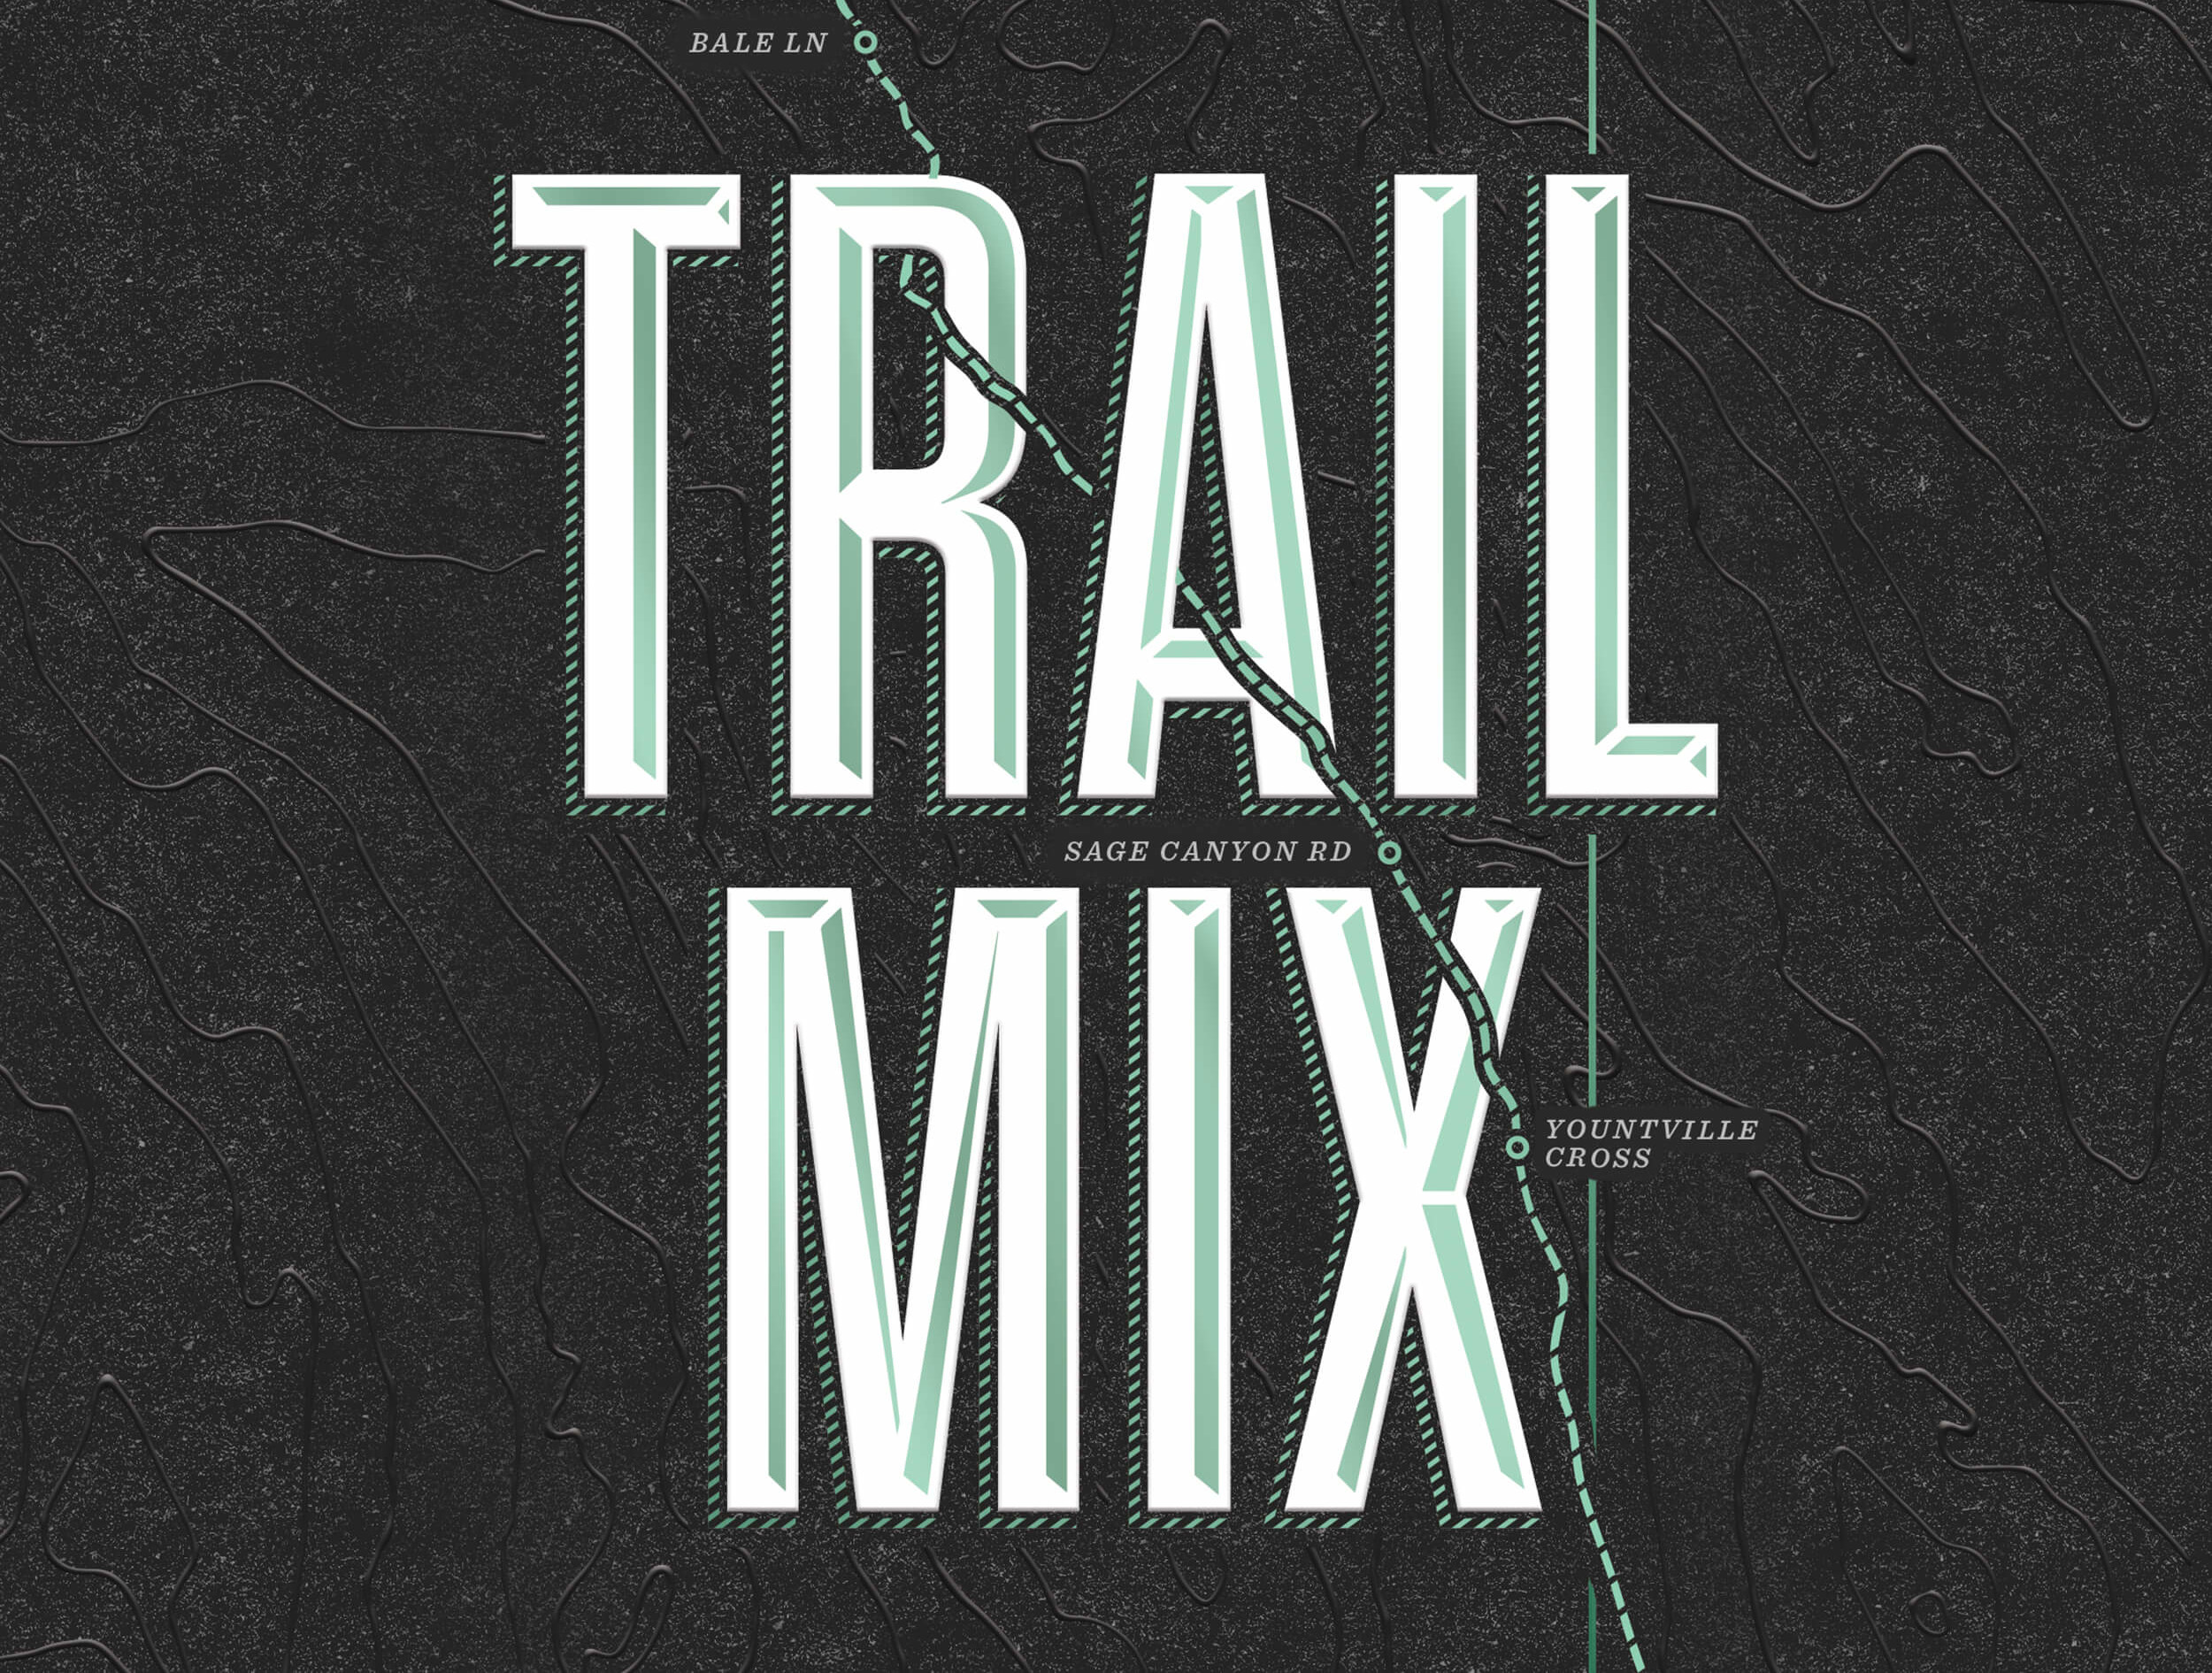 Logo and art for Trail Mix Wine label in Napa Valley, California